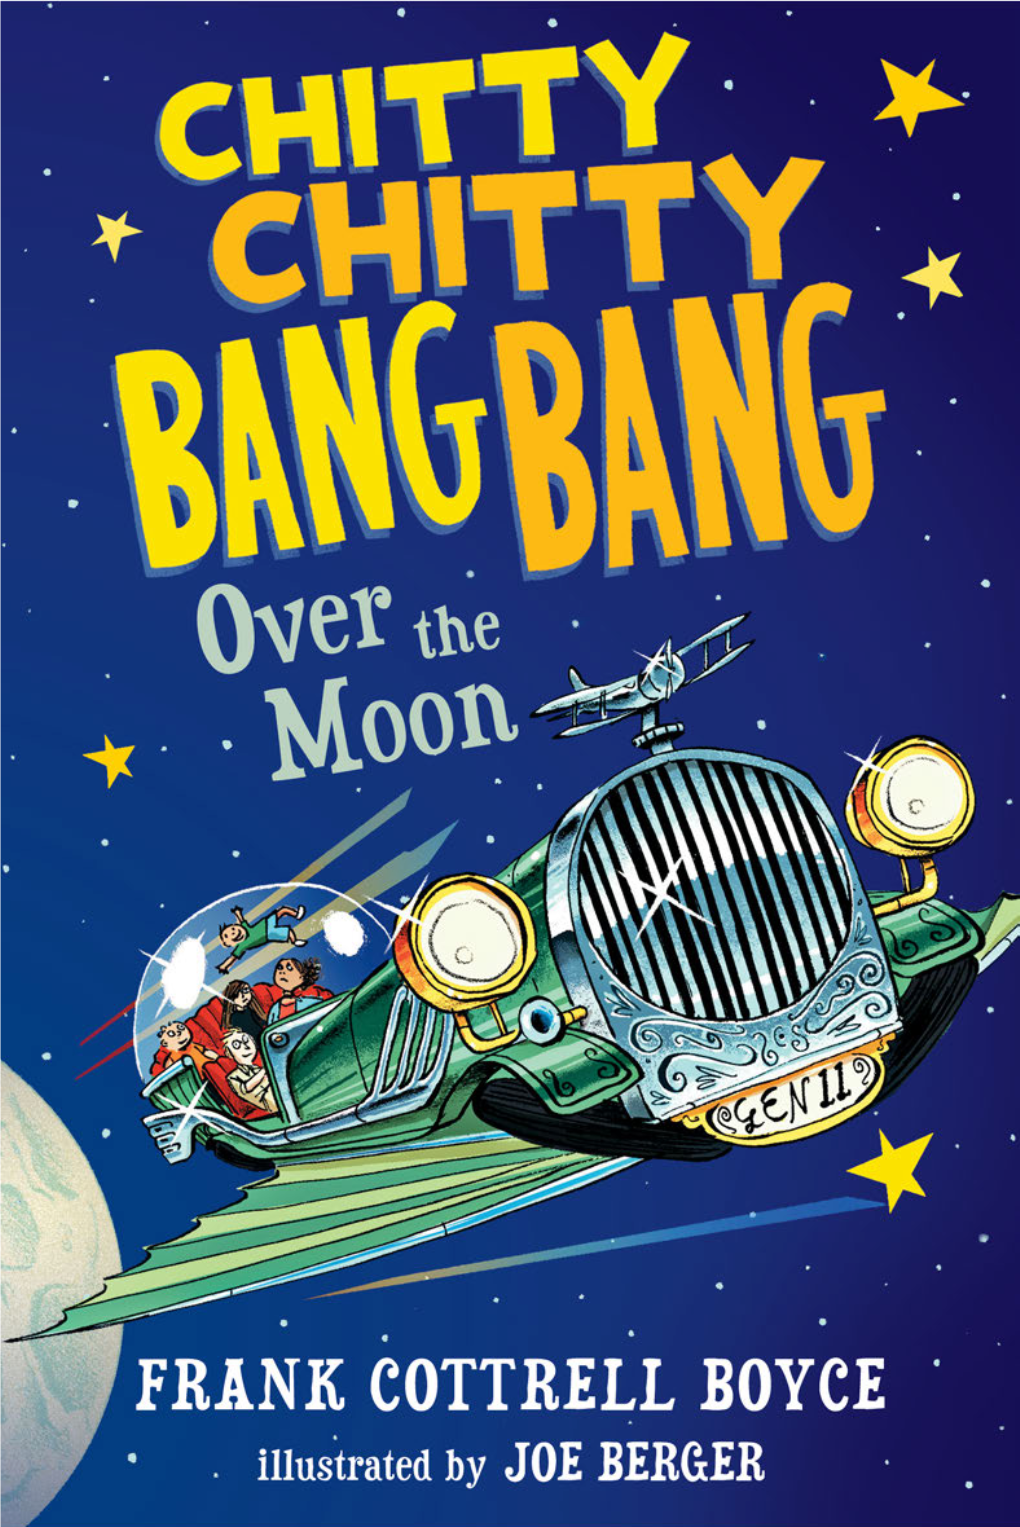 Chitty Chitty Bang Bang Over the Moon Frank Cottrell Boyce Illustrated by Joe Berger